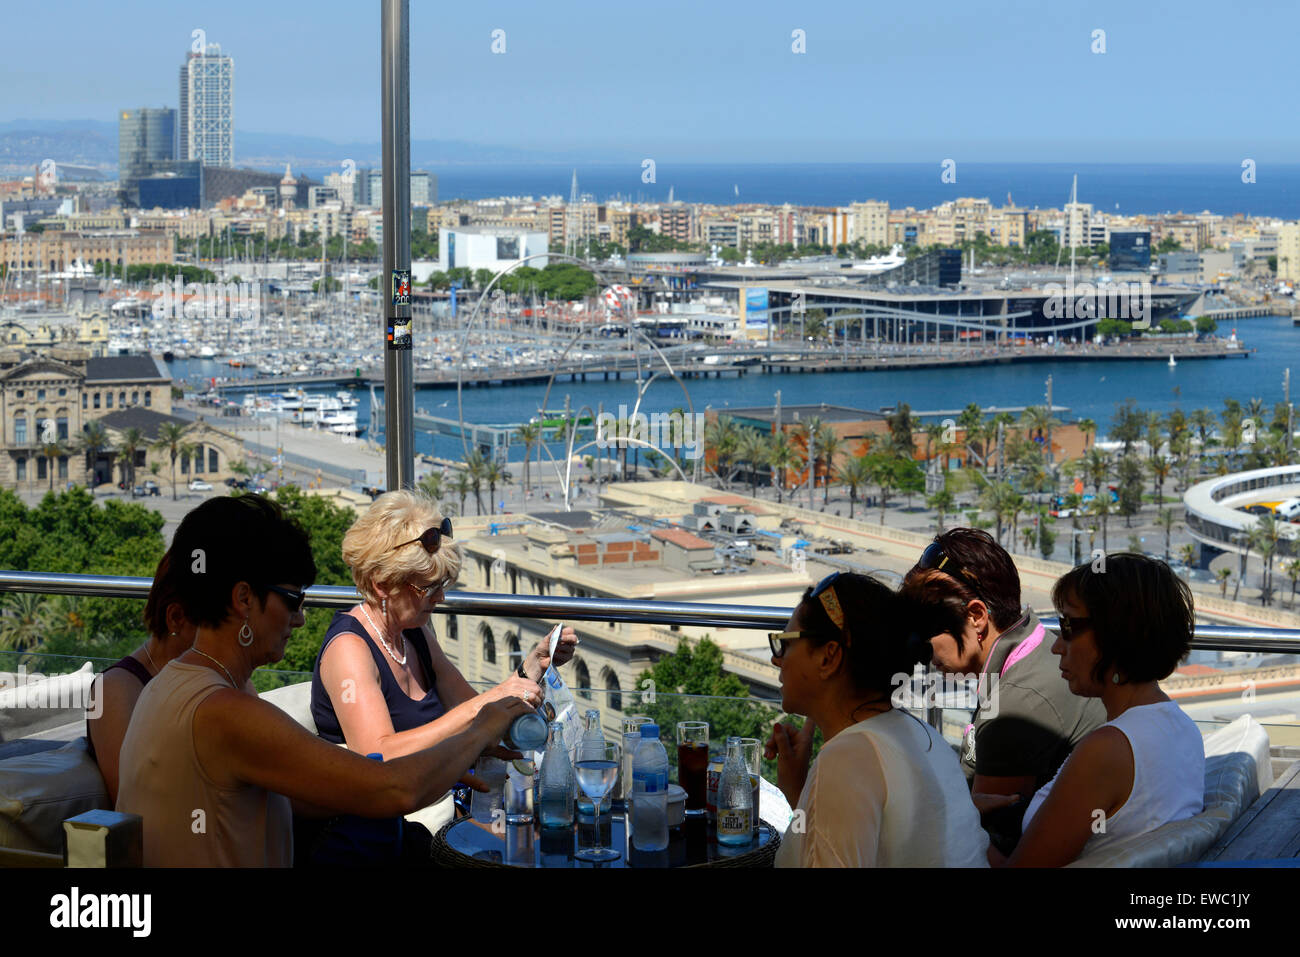 The Romantic route in Barcelona. Monjuic mountain. View of Barcelona Harbour. Above Harbour, Barcelona. People dinning in the Miramar gourmet restaurant. Stock Photo